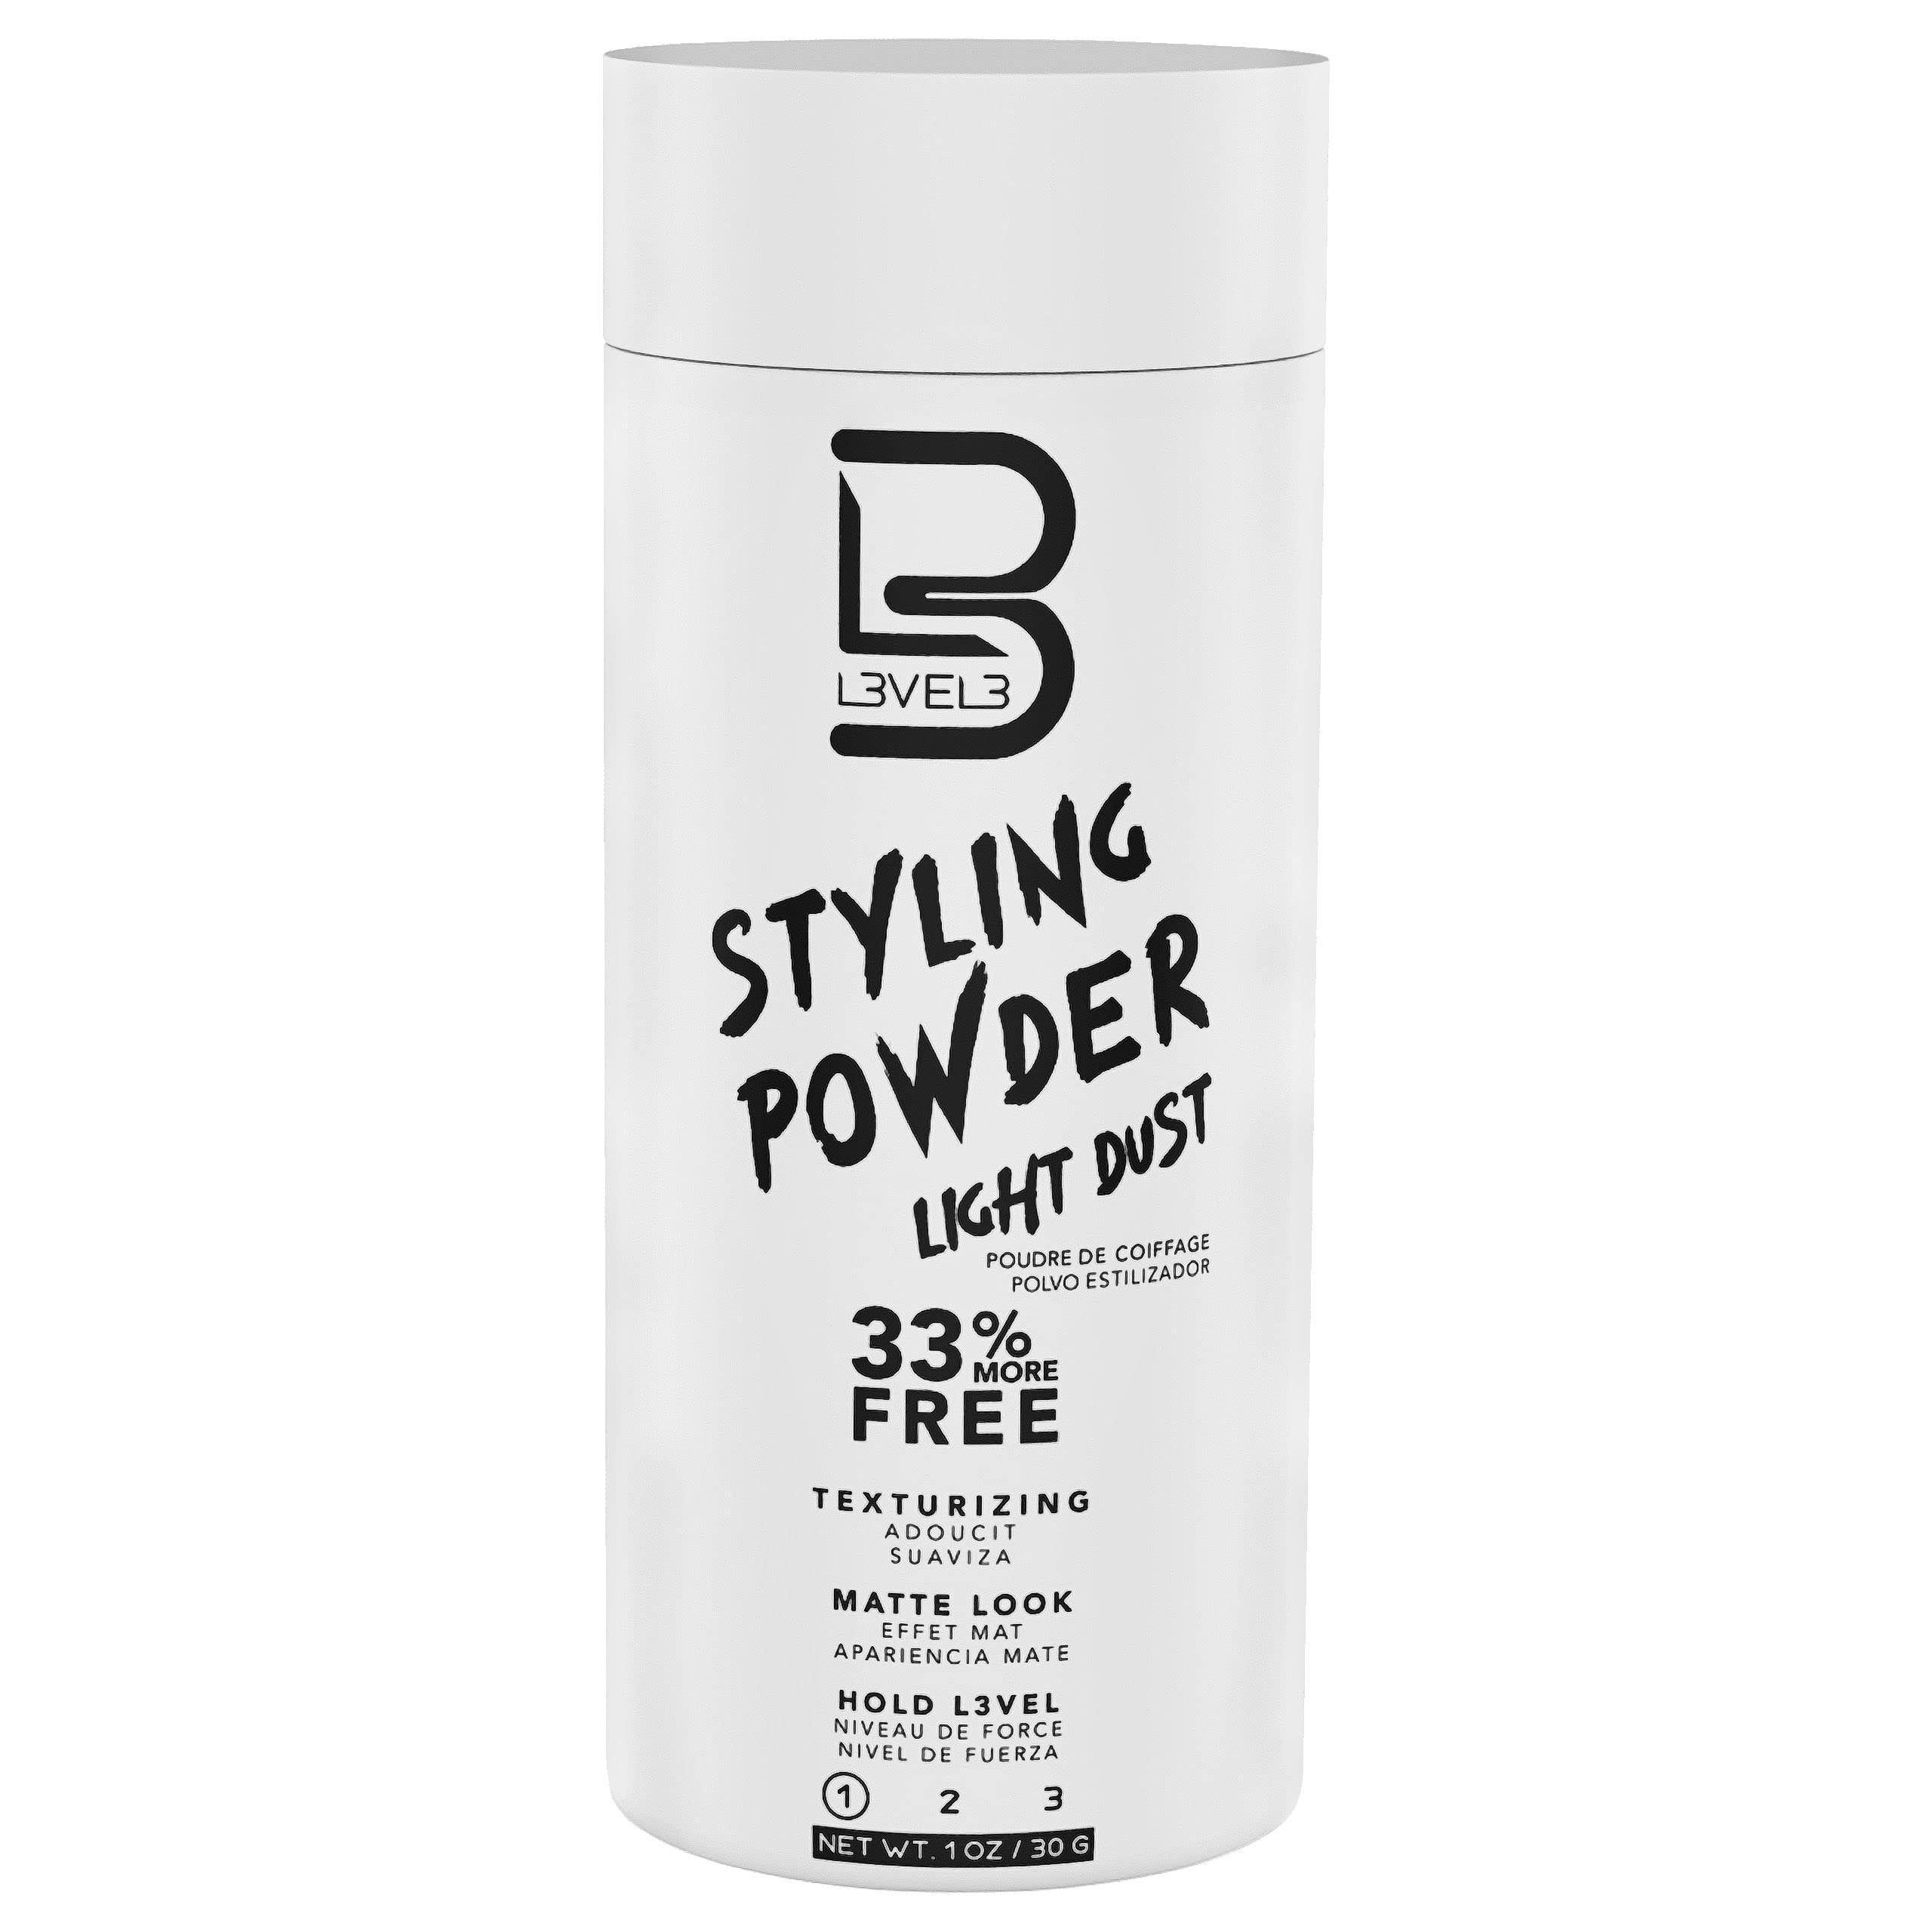 L3 Level 3 Travel Styling Powder - Small 0.18 oz for Travel - Natural Look  Mens Powder - Sample Styling Powder (Light Hold)